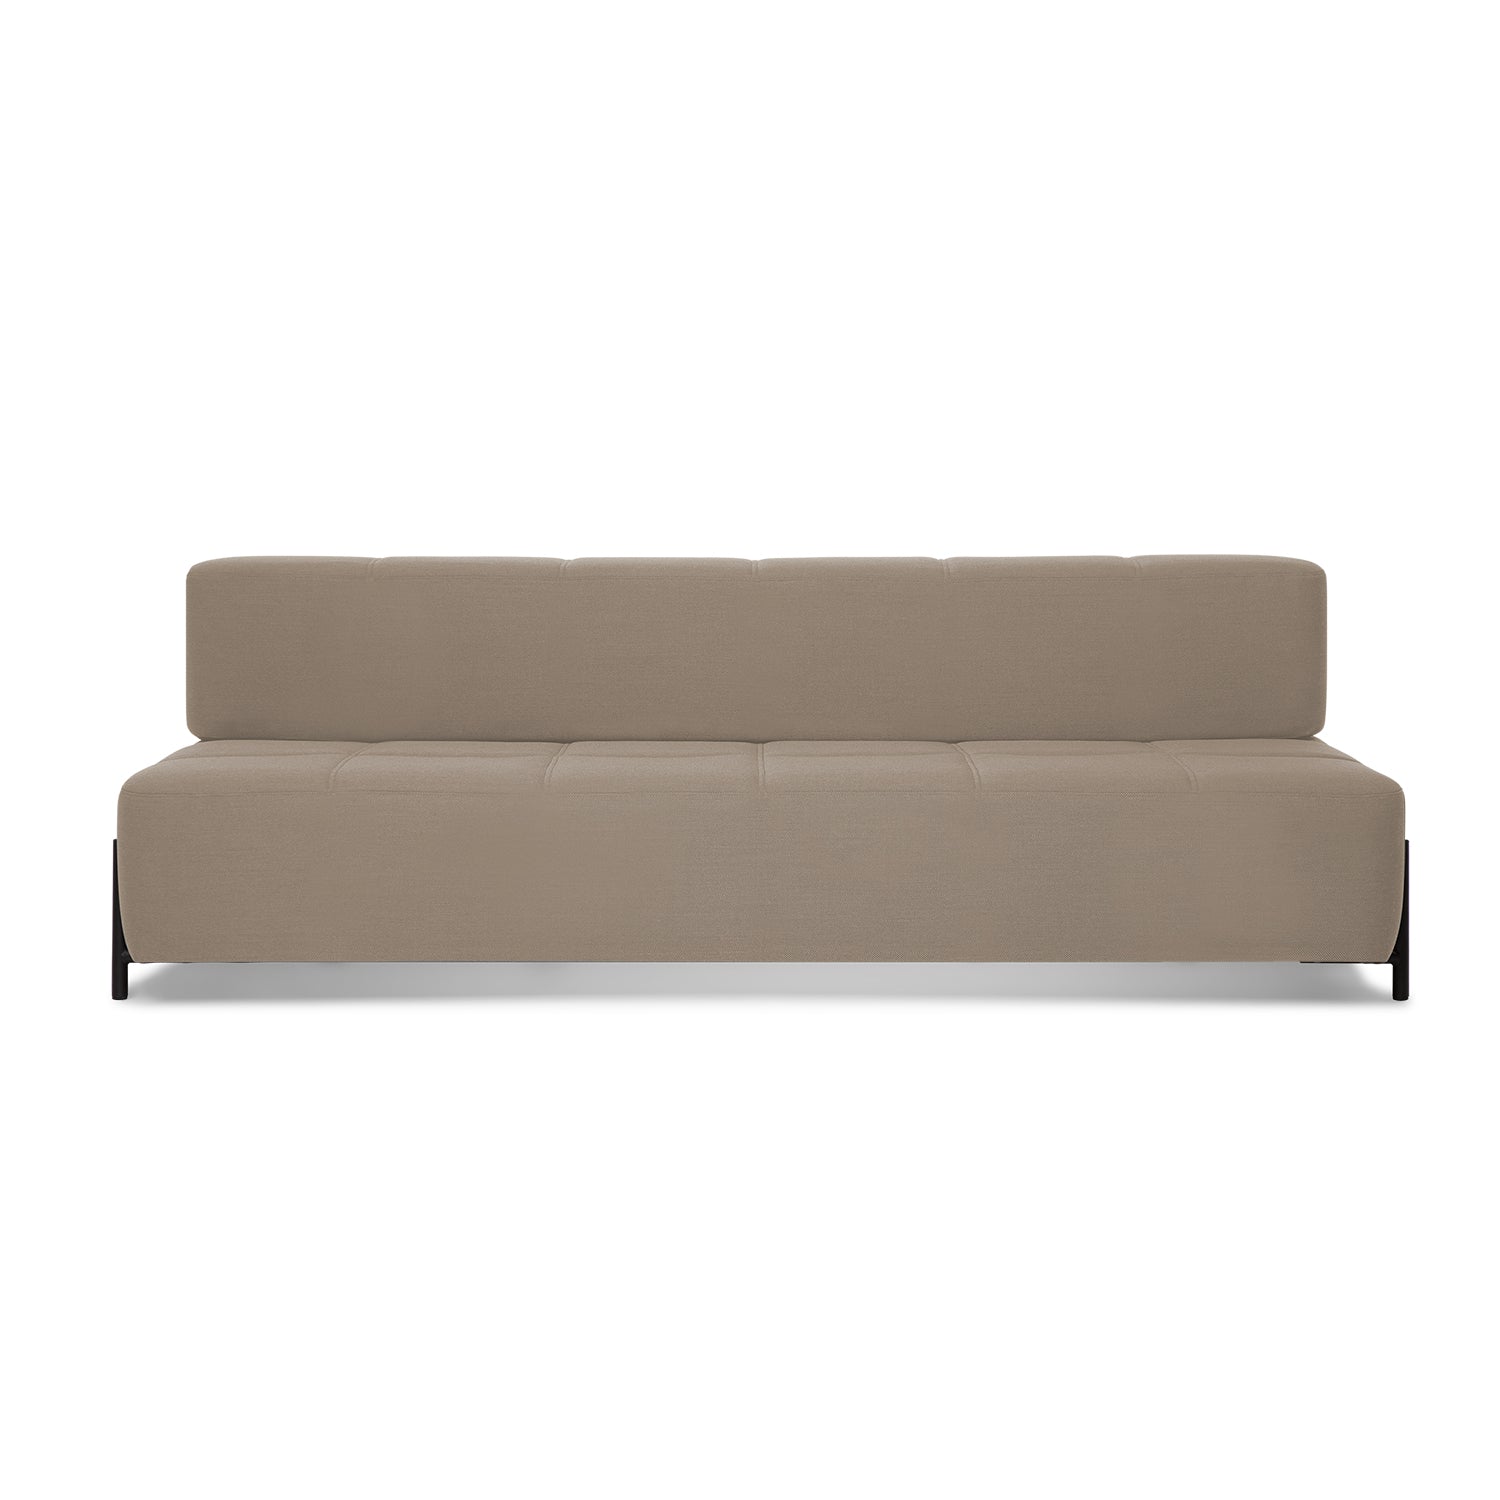 Northern Daybe Sofabed without Armrest in Light Brown